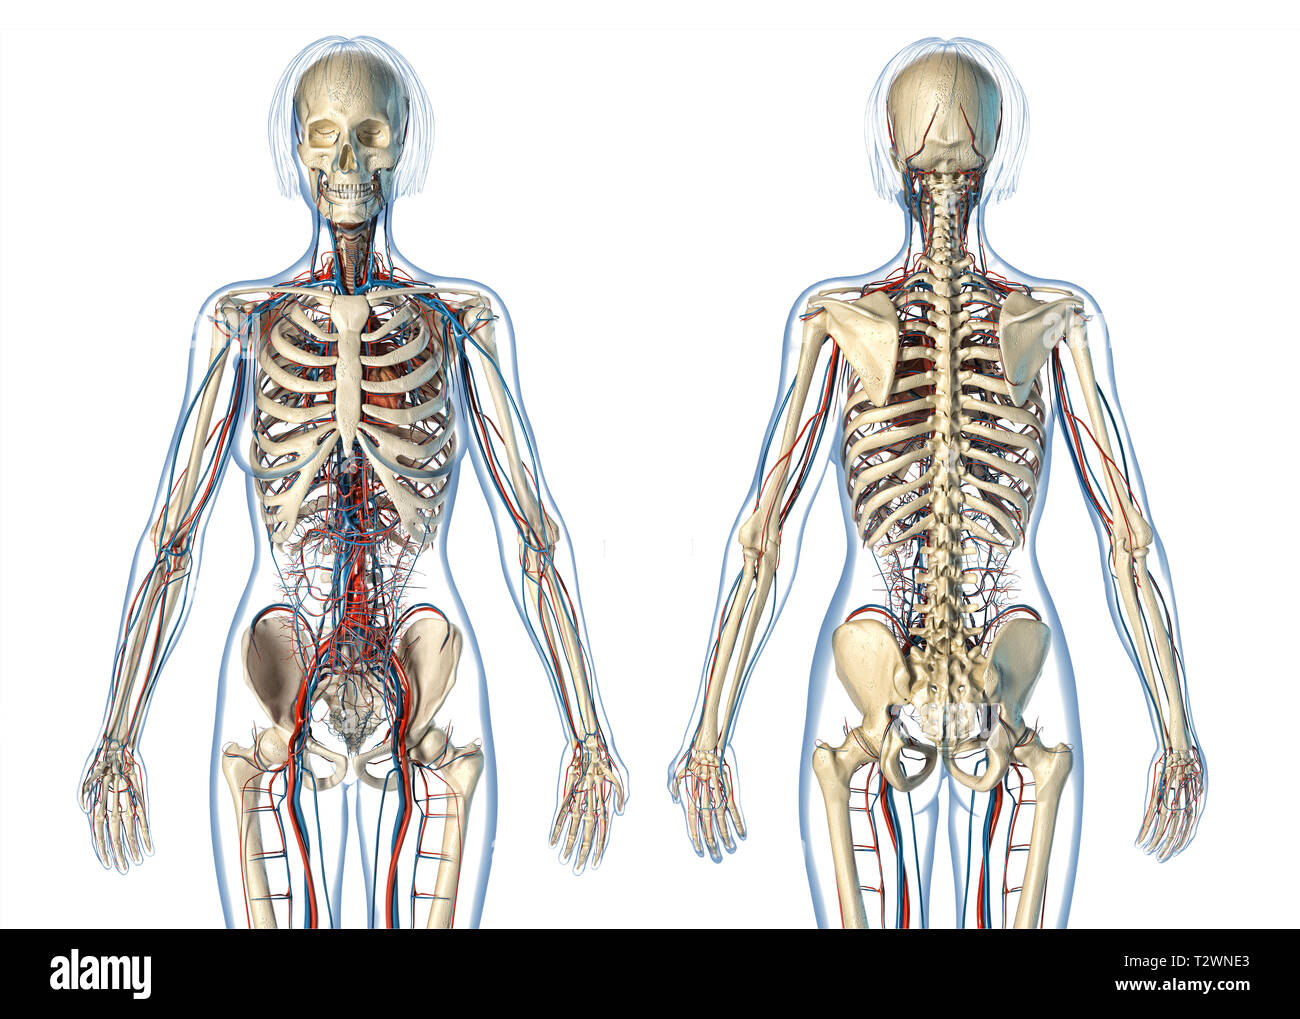 Woman anatomy cardiovascular system with skeleton, rear and front views. On white background. Stock Photo